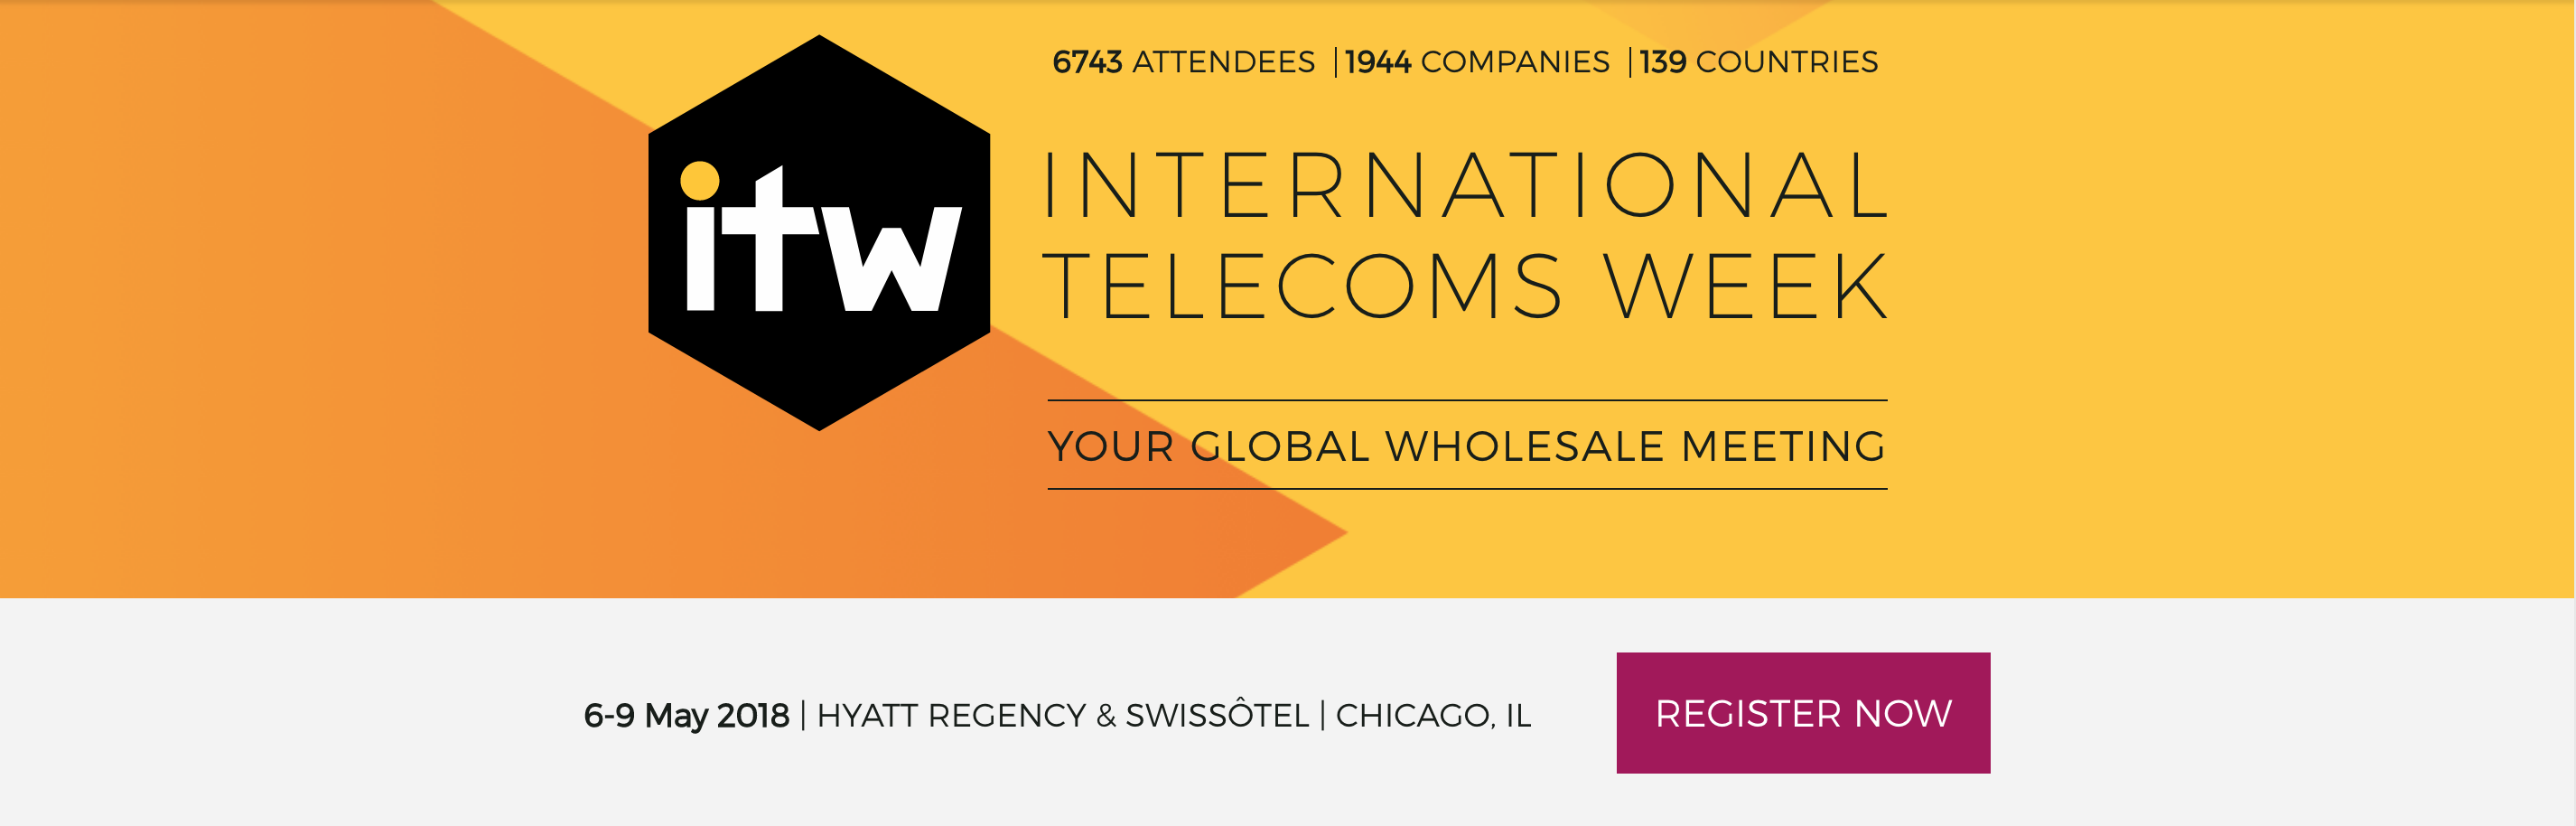 Be Our Guests At ITW 2018, 6-9 May 2018 | HYATT REGENCY & SWISSÔTEL | CHICAGO, IL